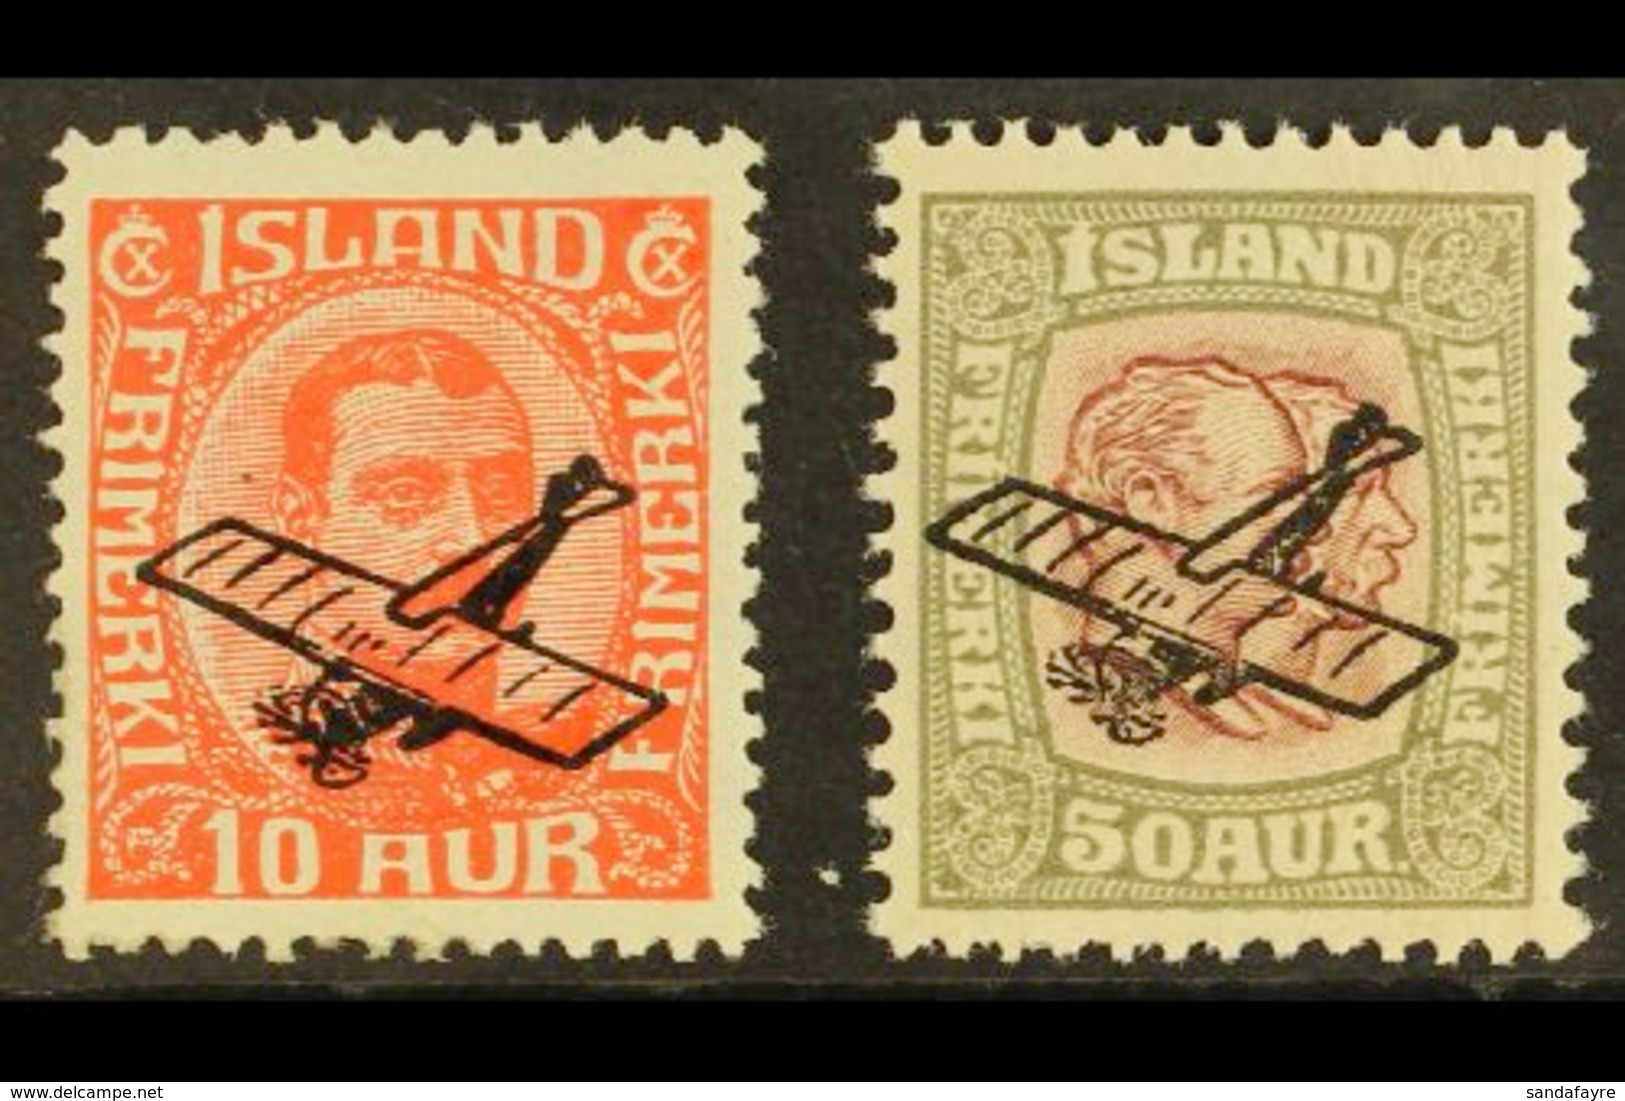 1928-29 Air Aircraft Overprints Complete Set (SG 156/57, Facit 160/61, Michel 122/23), Never Hinged Mint. (2 Stamps) For - Other & Unclassified